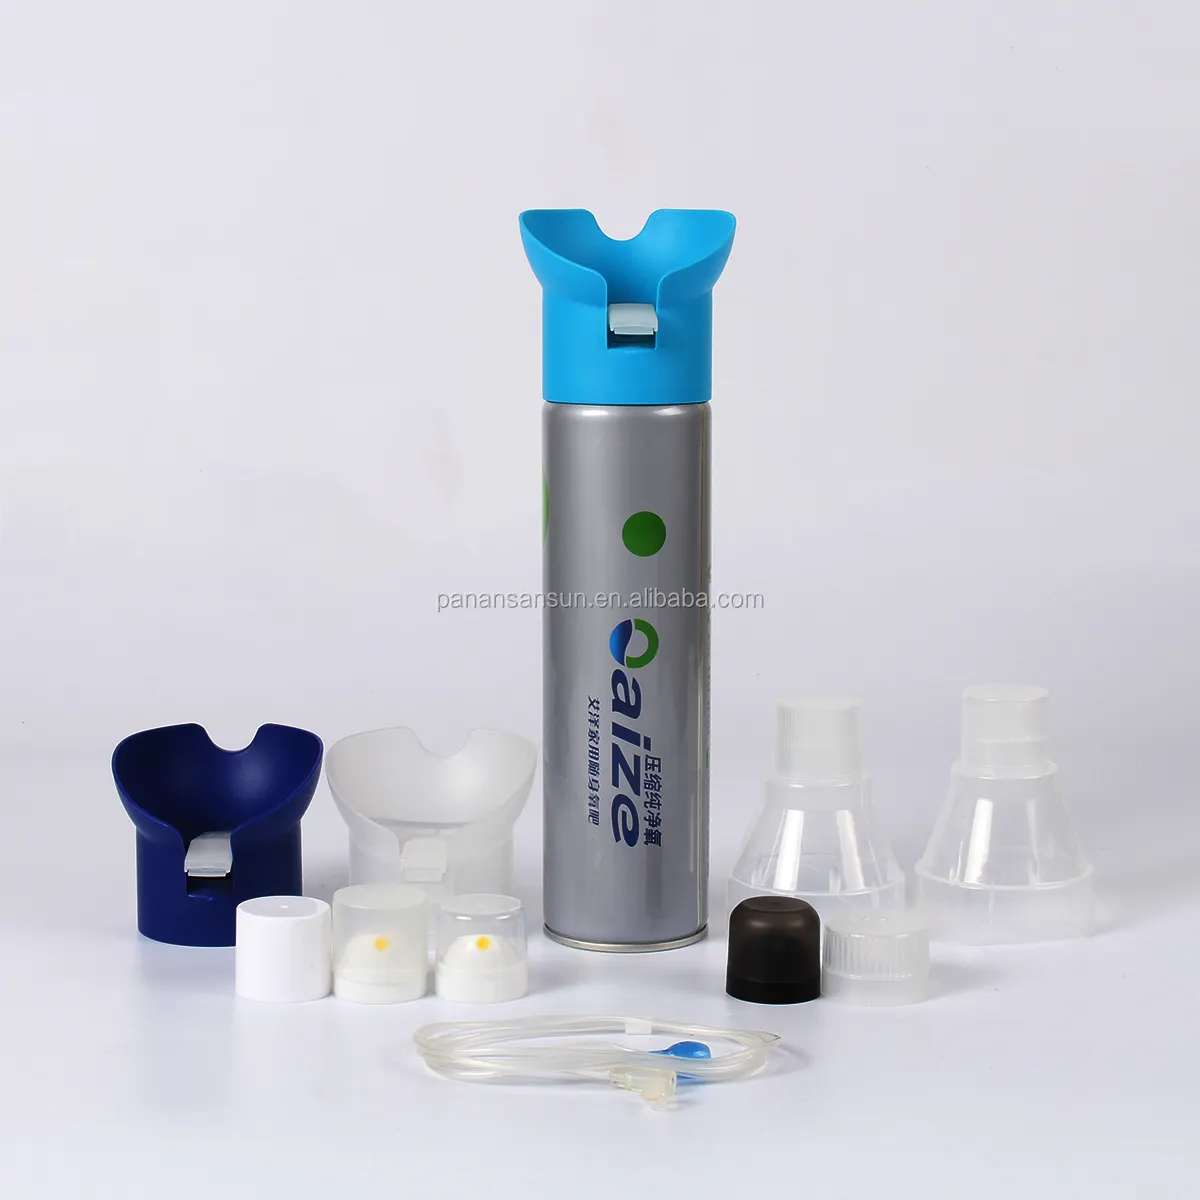 2023 Oxygen O2 Air Inhaler Sports 95% Pure Demo Energy Review test Portable Canned